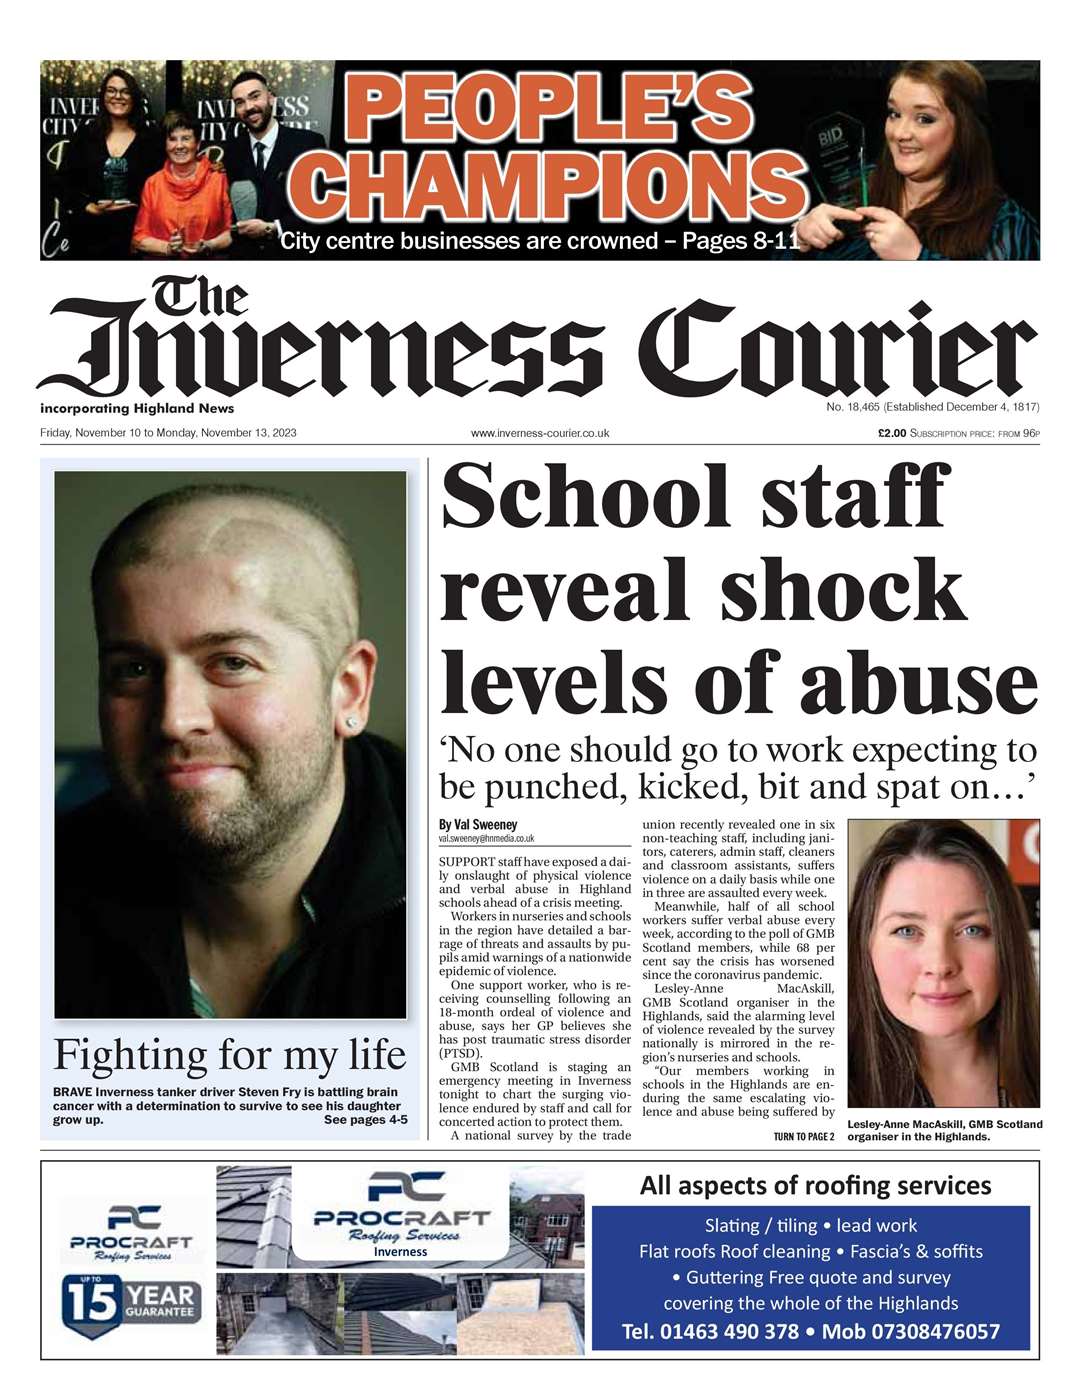 The Inverness Courier, November 10, front page.